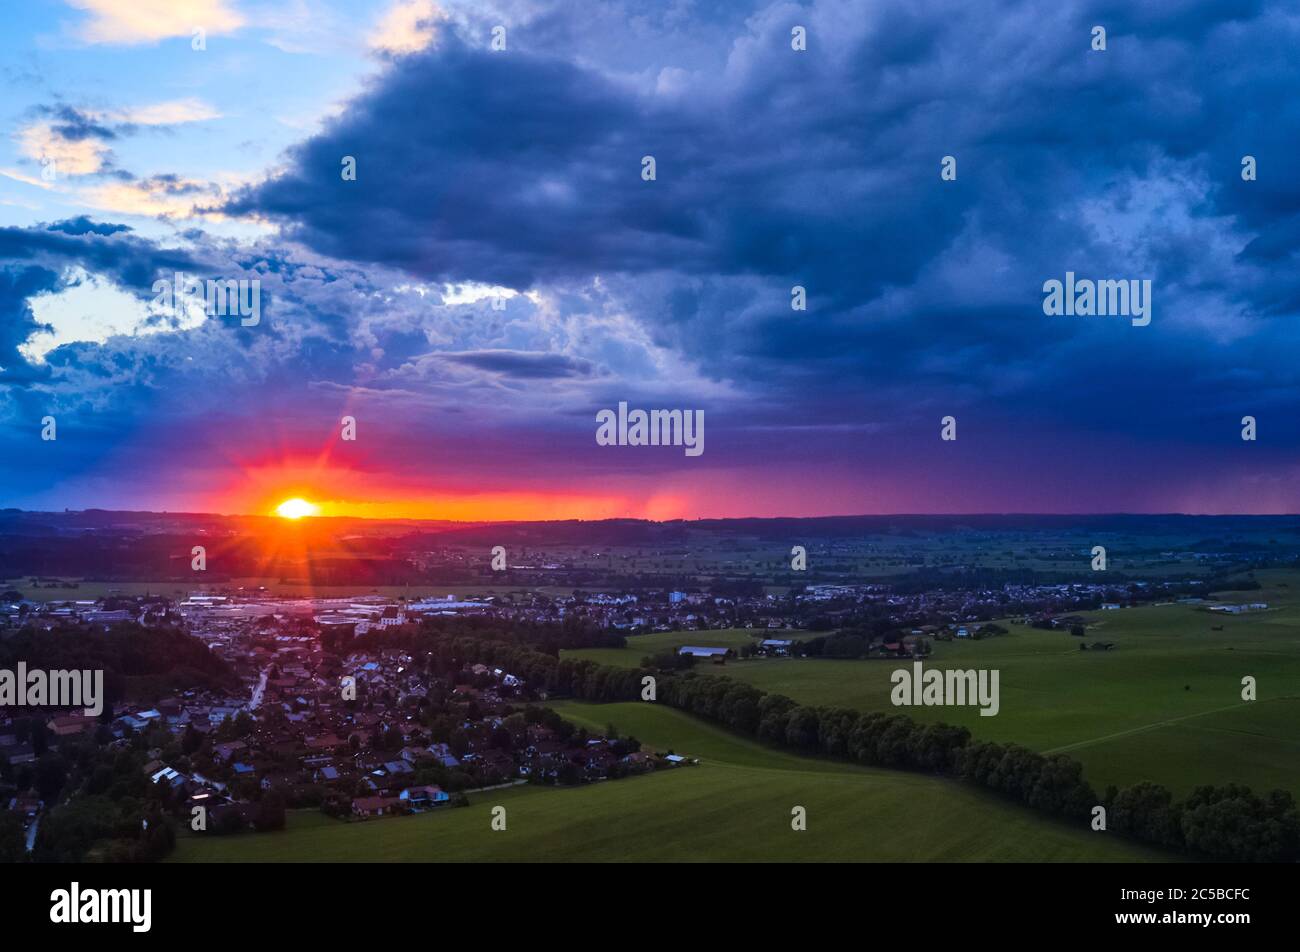 Marktoberdorf, Germany, July 01, 2020.  Stormy weather with heavy rain changes with sunset and rainbow. Aerial drone image Mavic 2 pro. © Peter Schatz / Alamy Stock Photos Stock Photo